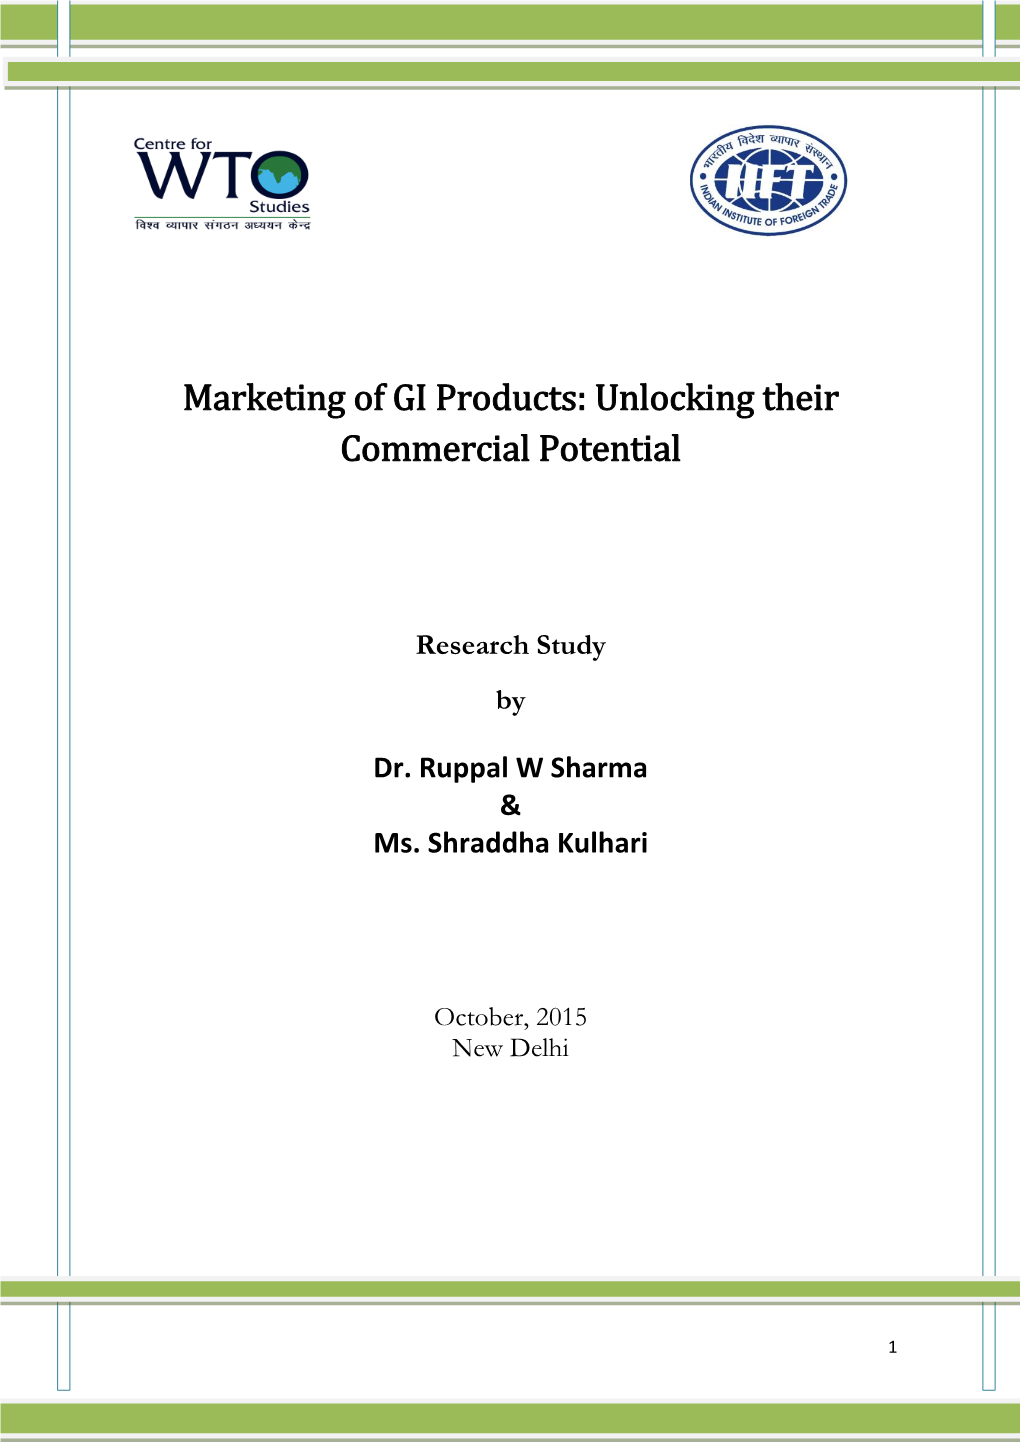 Marketing of GI Products: Unlocking Their Commercial Potential